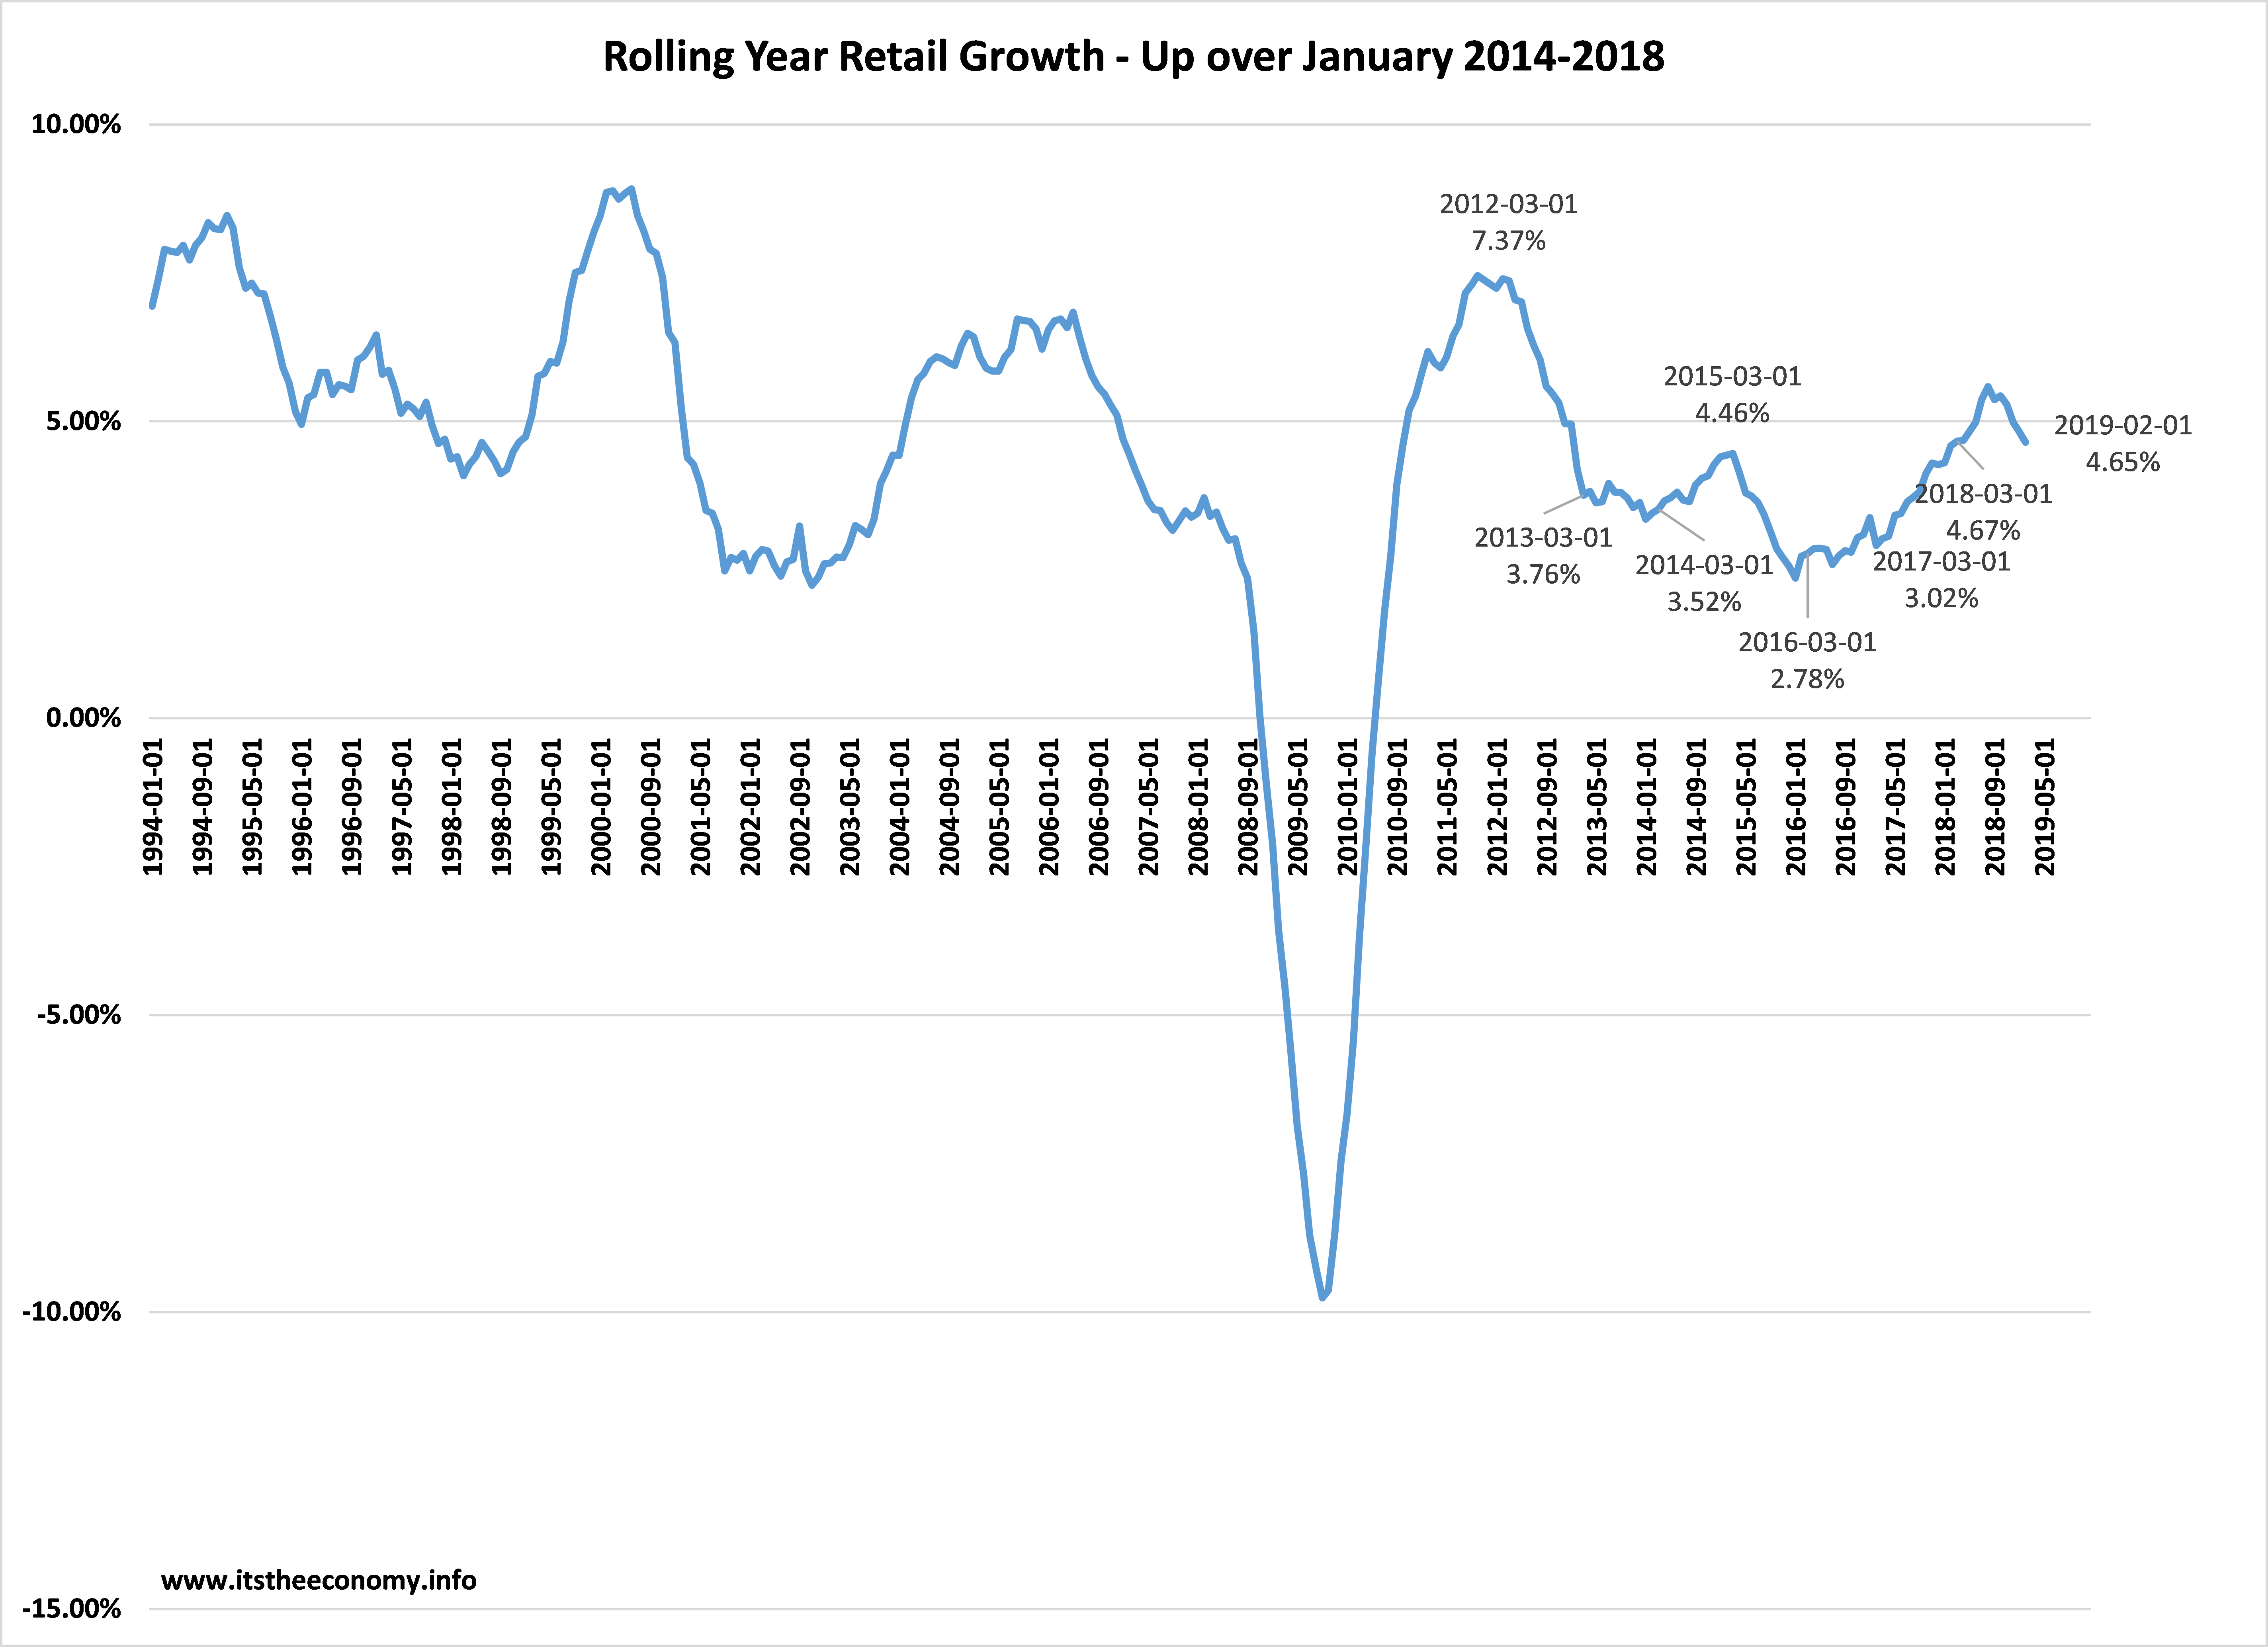 March Retail Sales culd see a non-seasonally adjusted annual growth rate Better than last month and last March, or slightly slower. Expect 4.50% to 4.75% growth.